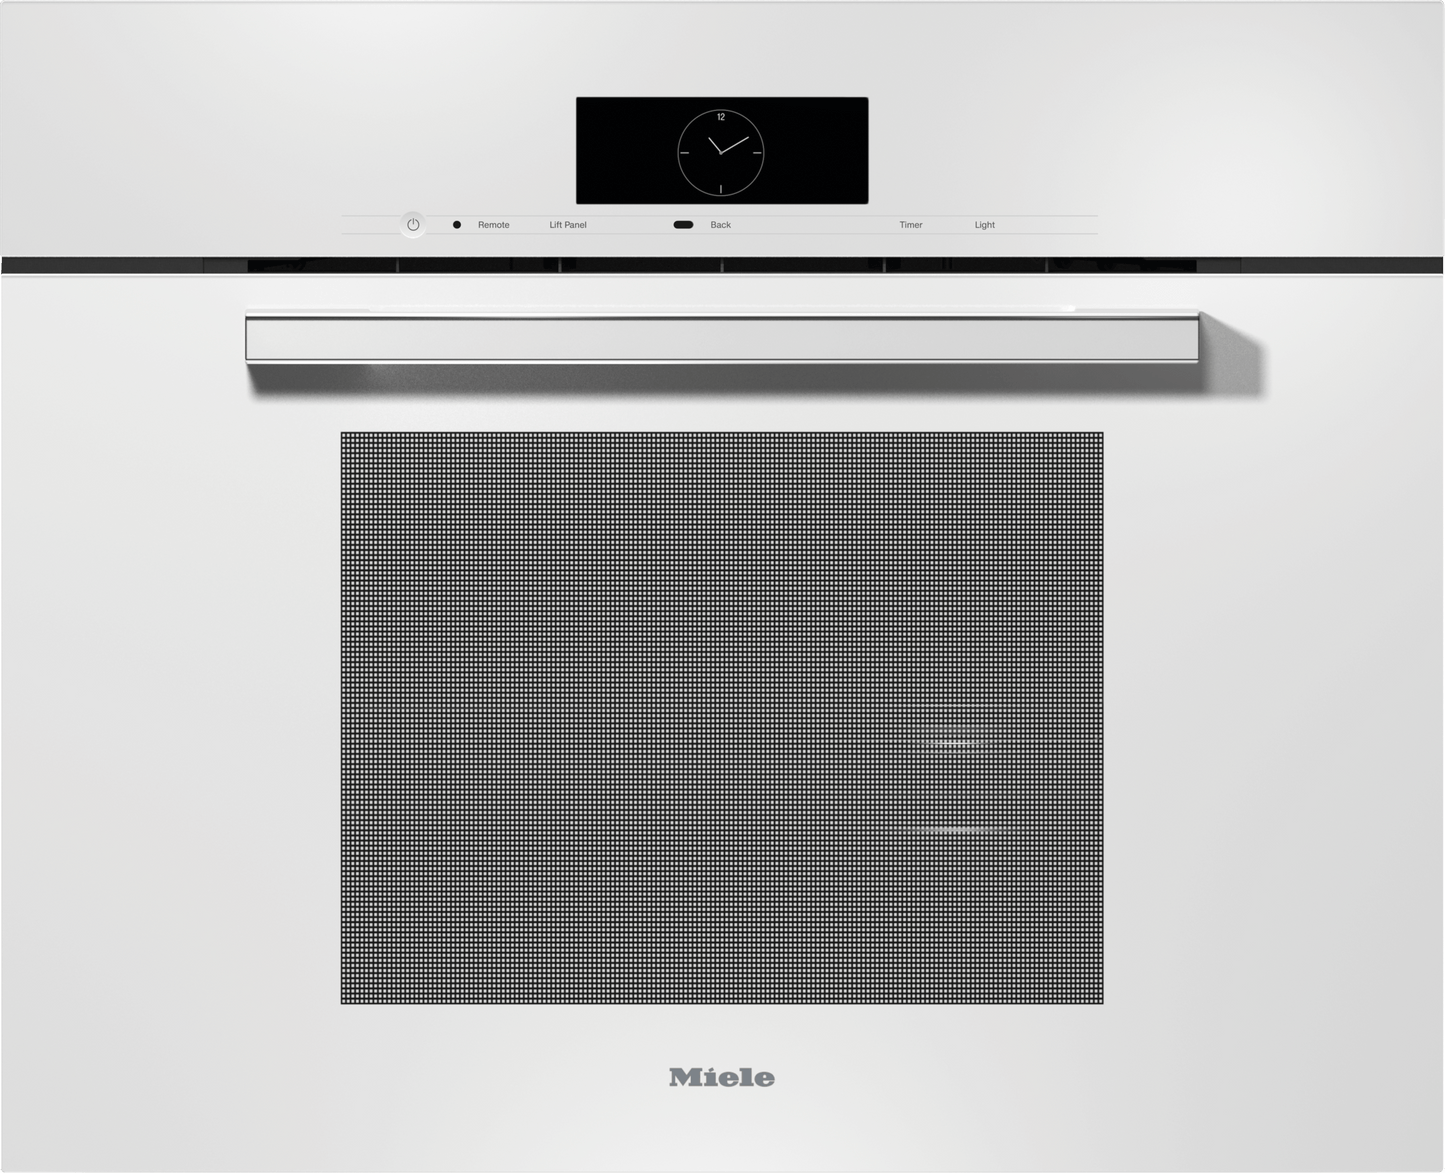 Miele DGC7880 WHITE   30" Combi-Steam Oven Xxl For Steam Cooking, Baking, Roasting With Roast Probe + Menu Cooking.